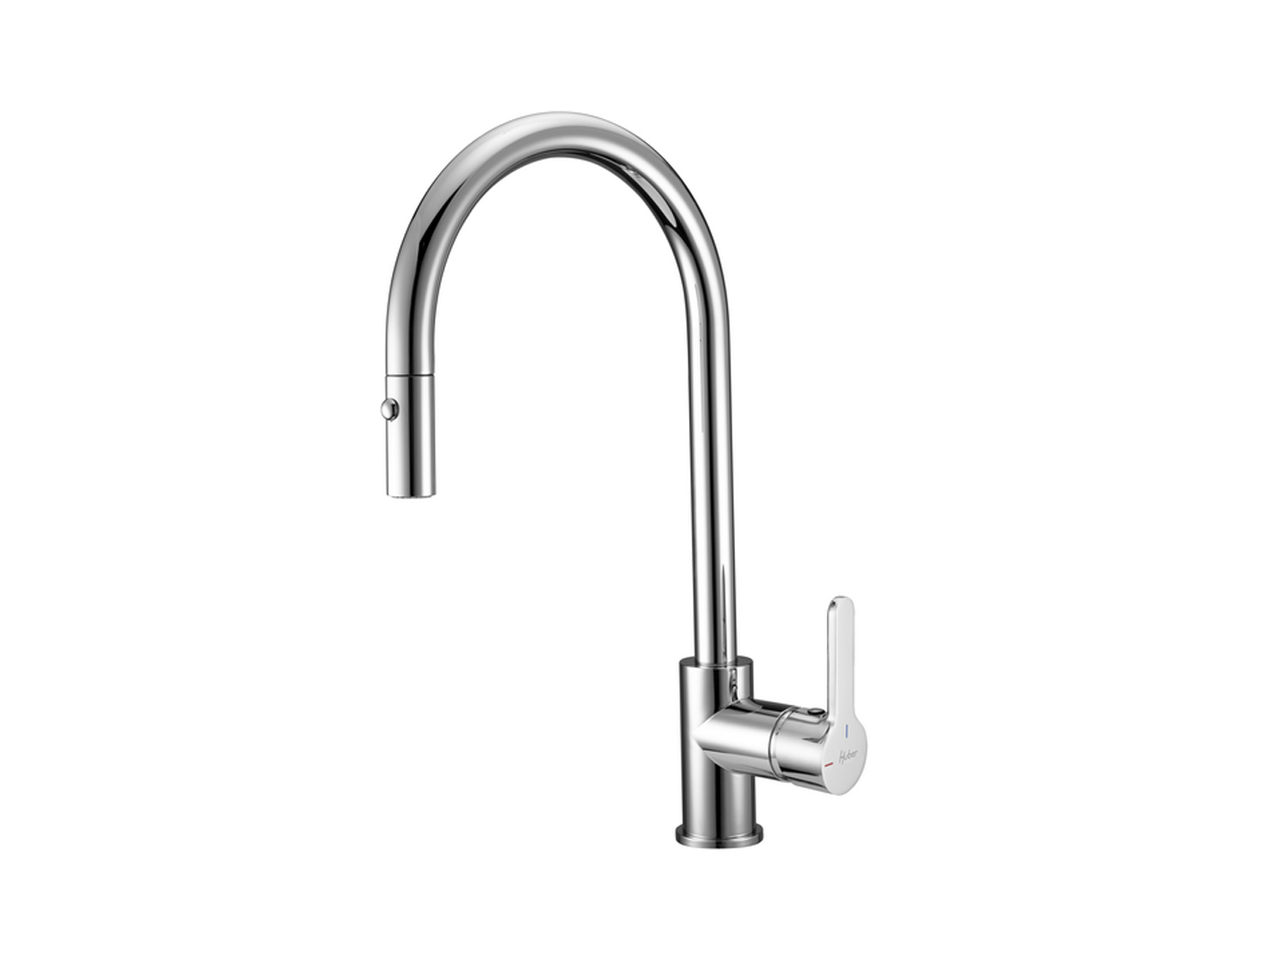 HUBERSingle lever sink mixer ES with pull out handspray KITCHEN